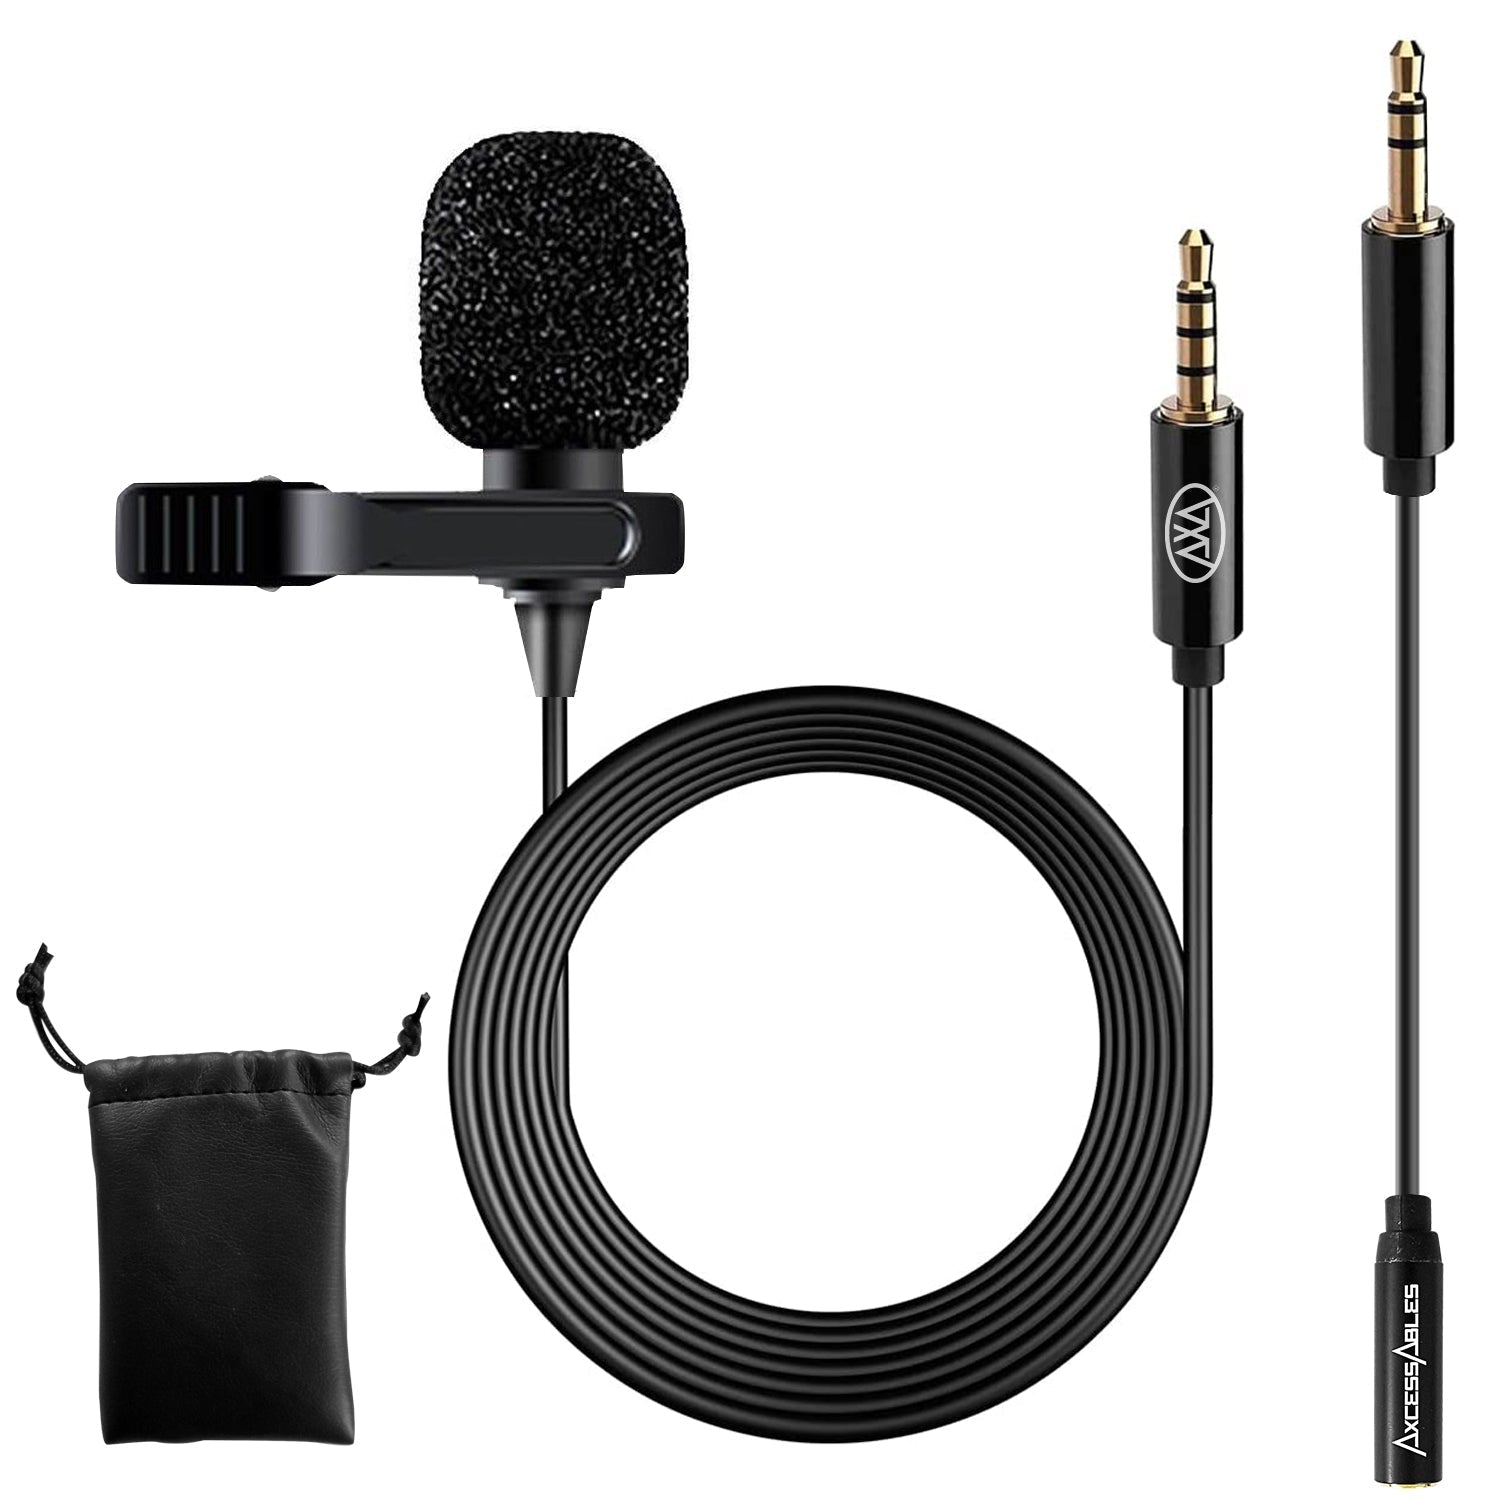 AxcessAbles Lavalier Clip-On Microphone with 5ft TRRS 3.5mm Cable and Adapter | Omnidirectional Condenser Lapel Microphone for Audio Recording| AxcessAbles Lav Mic - Open Box